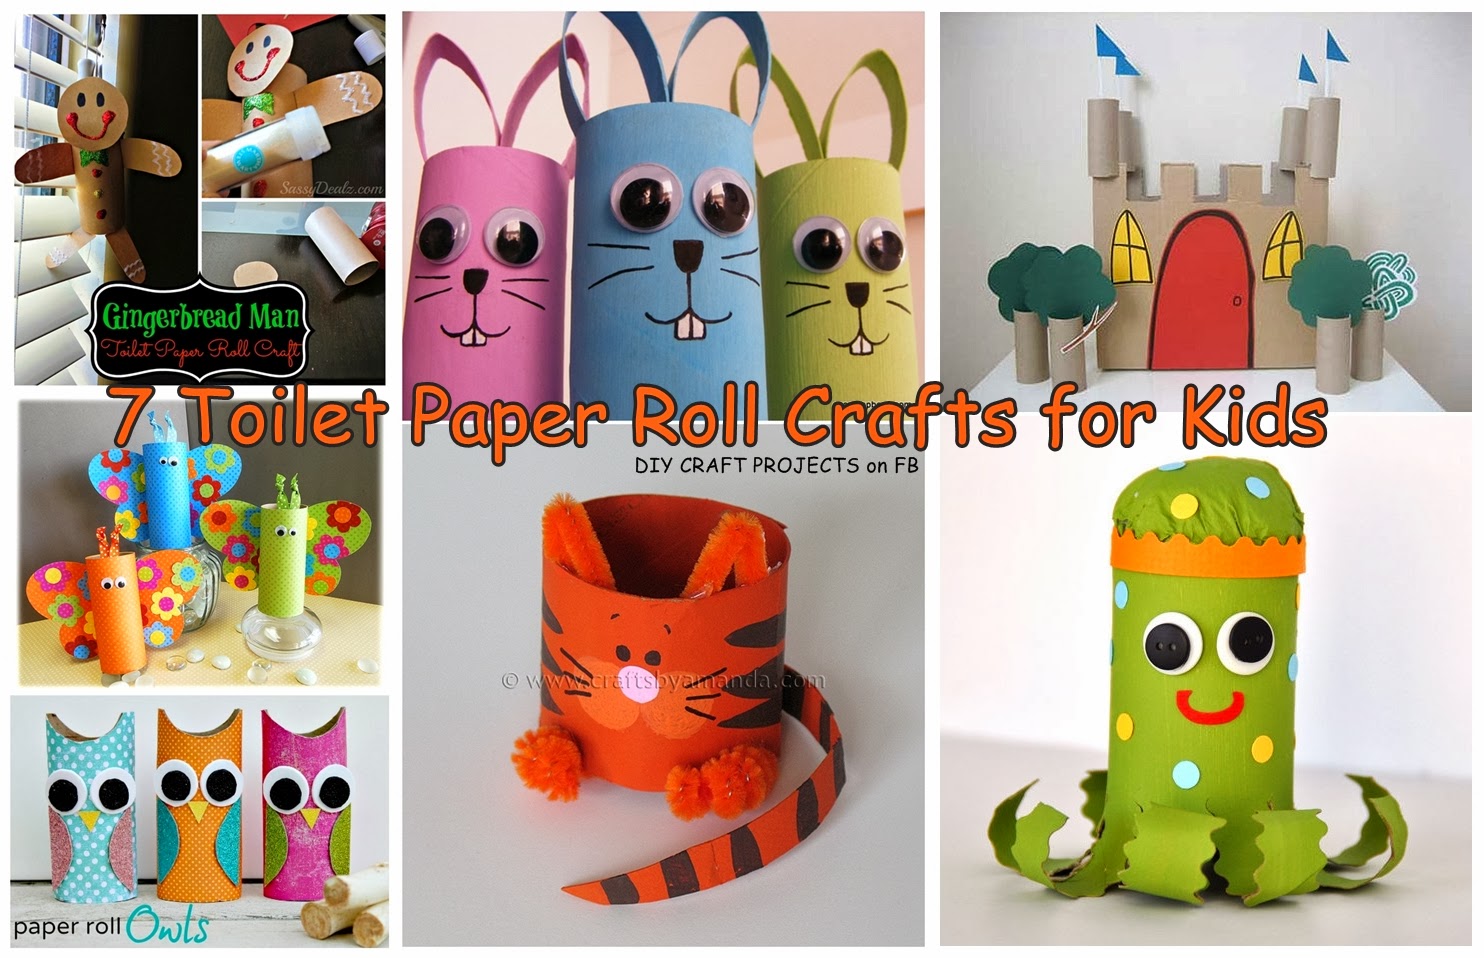 DIY All Things 7 Toilet Paper Roll Crafts for Kids